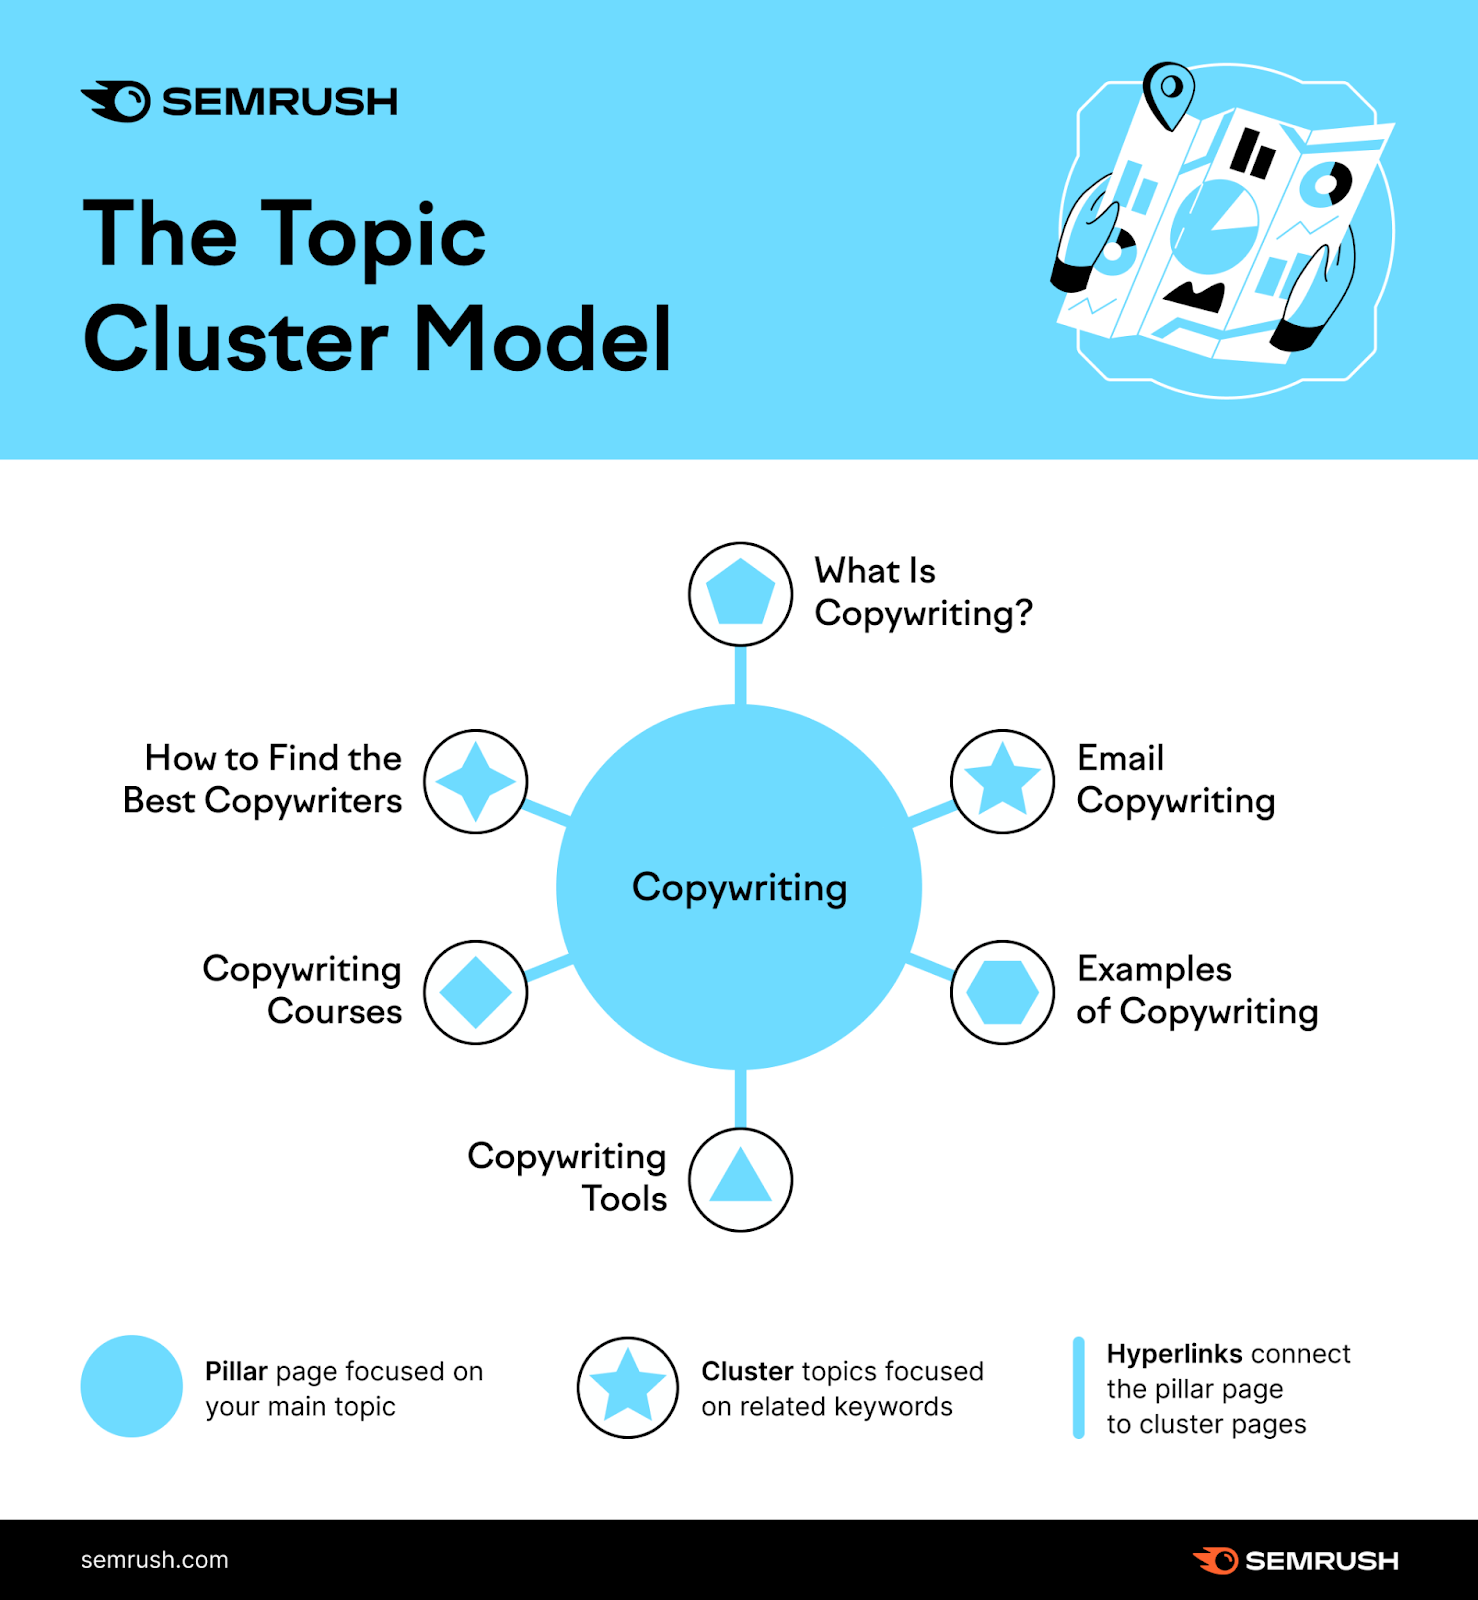 an image illustrating the topic cluster model using "copywriting" as the main keyword